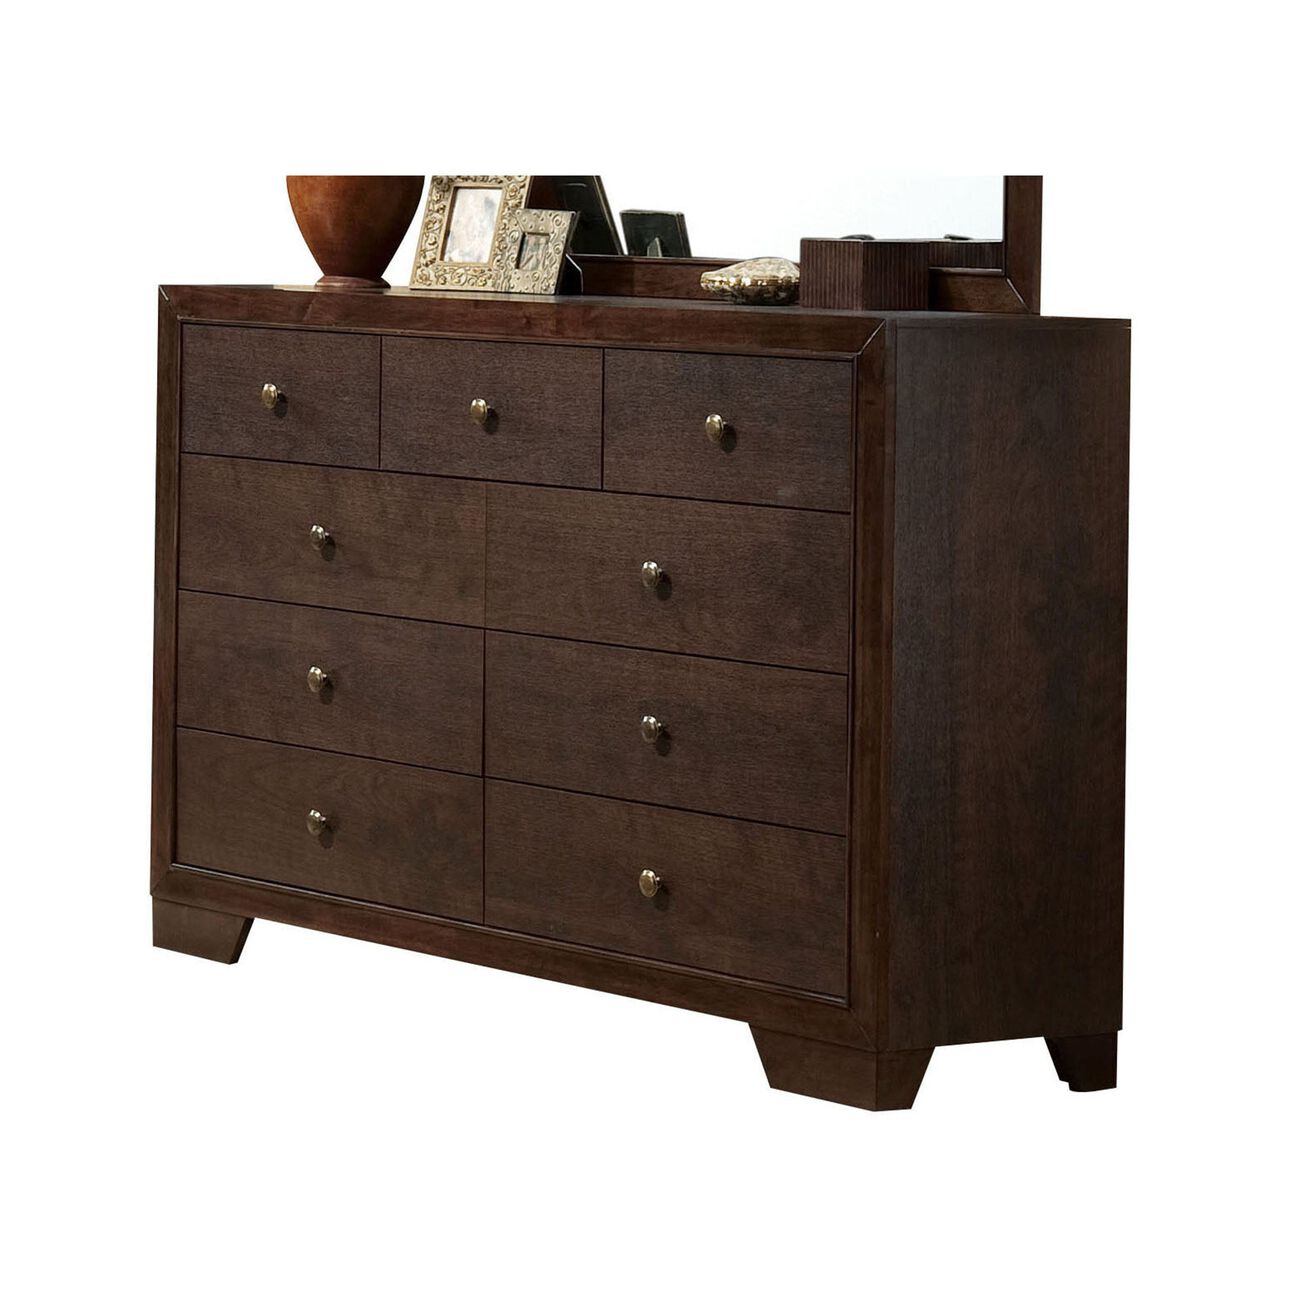 Contemporary Style Wooden Dresser With 9 Drawers, Espresso Brown